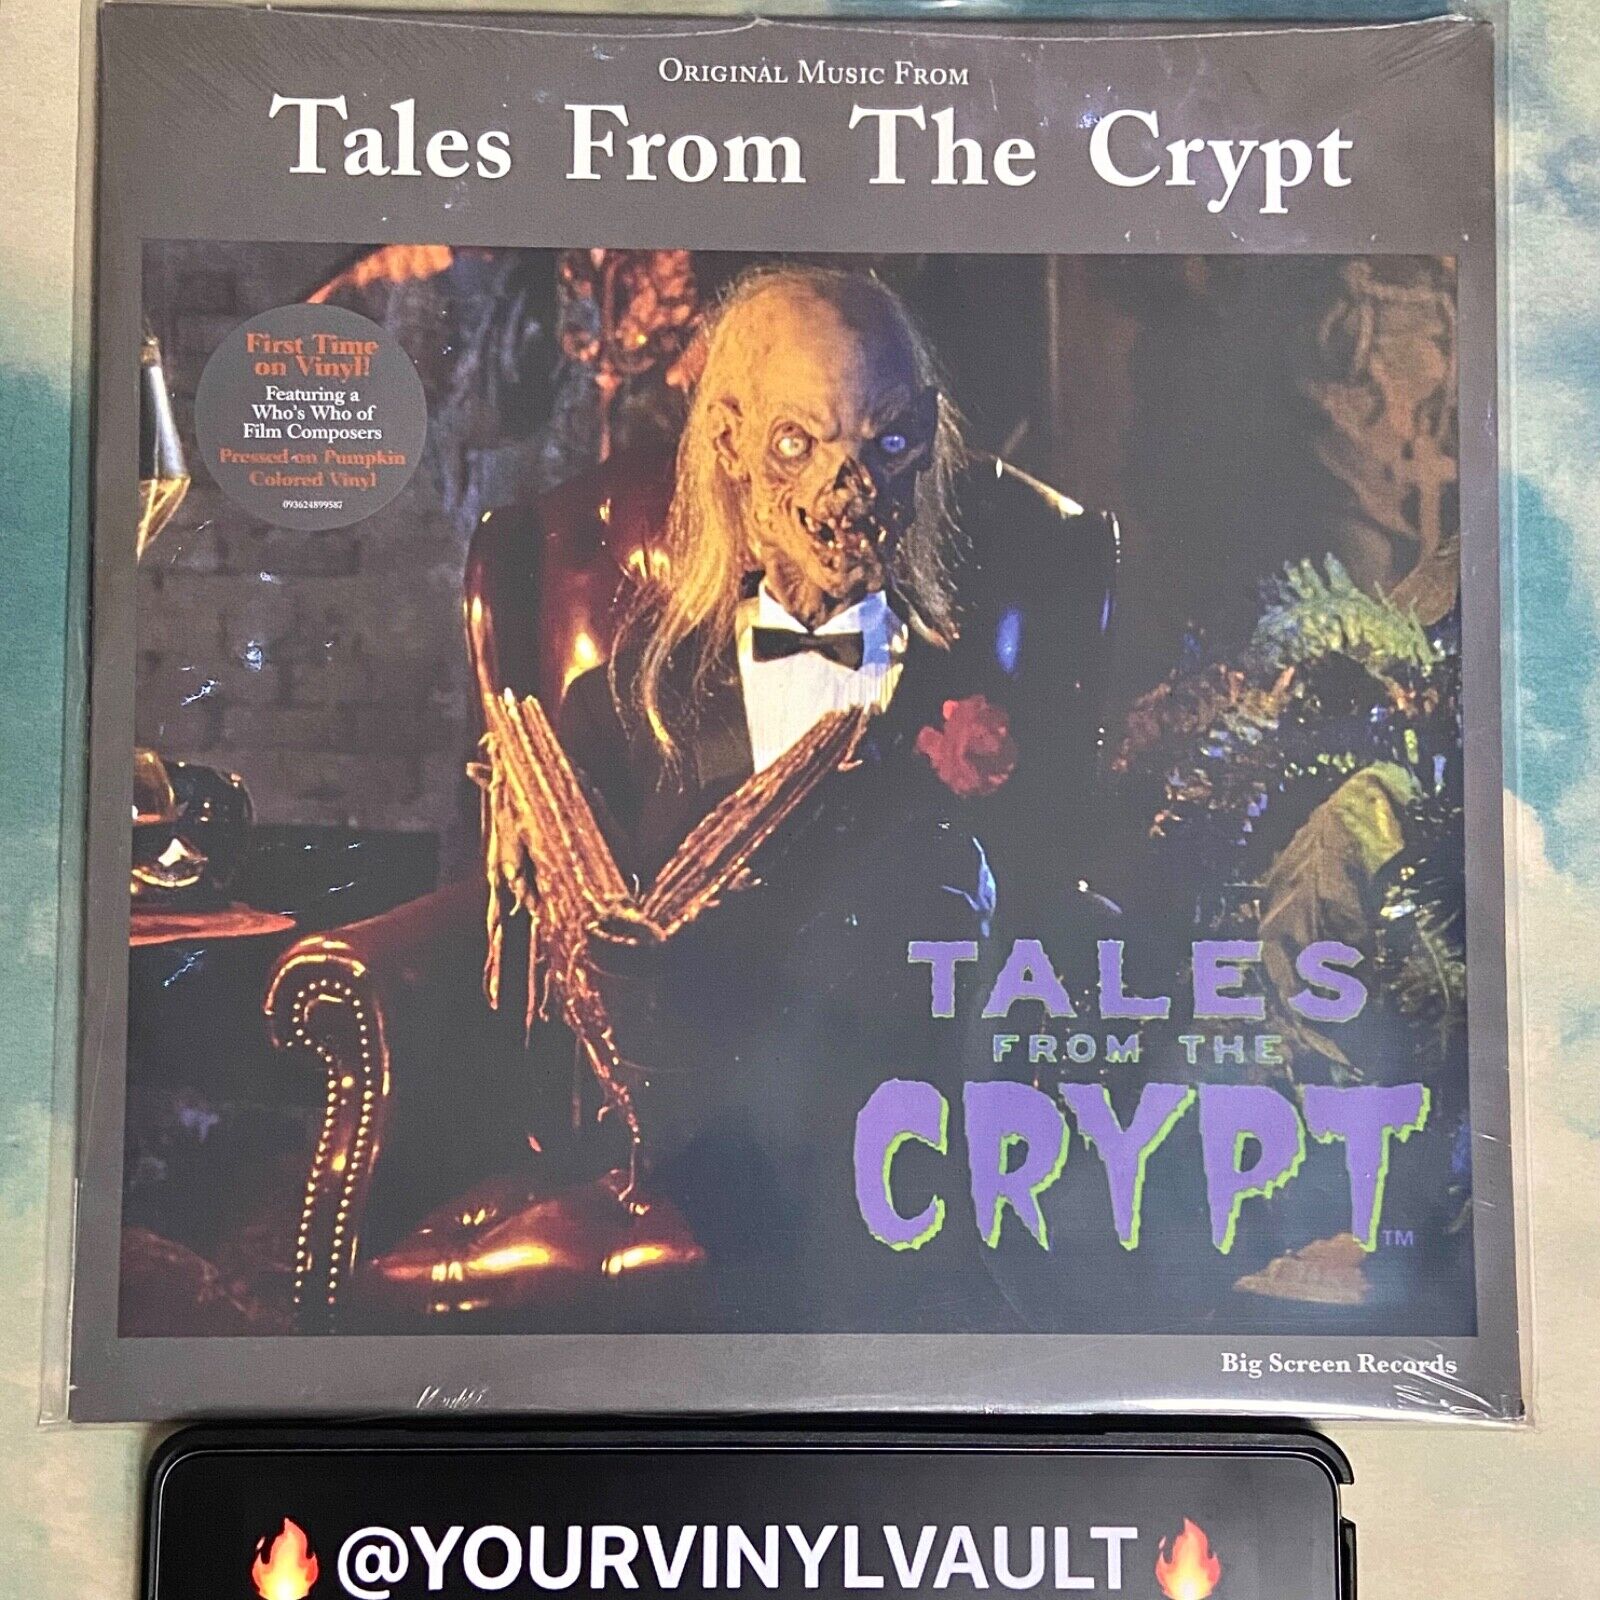 TALES FROM THE CRYPT Soundtrack Vinyl Orange Colored Soundtrack Record Halloween